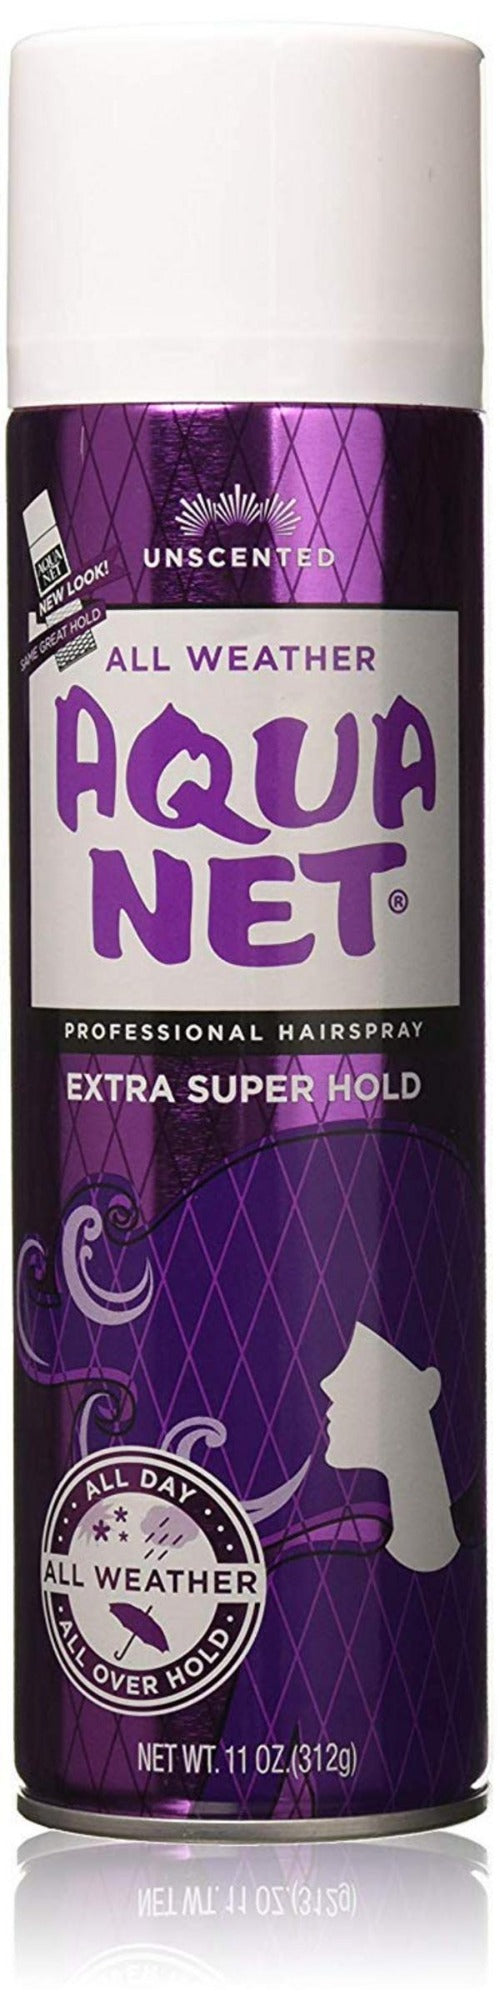 Aqua Net Extra Super Hold Professional Hair Spray Unscented, 11 oz (Pack of 2)